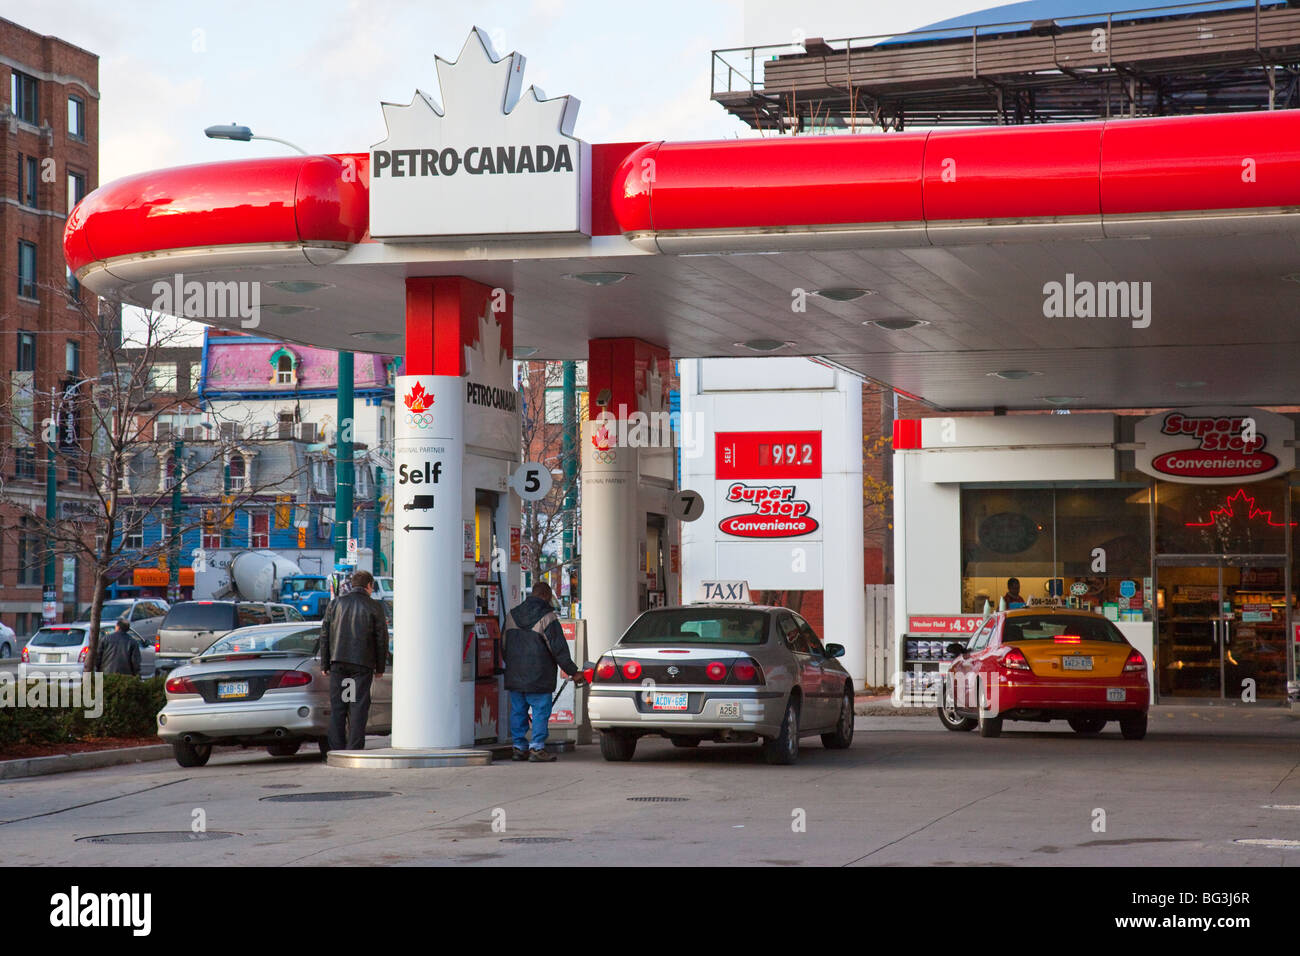 Petro-Canada Gas Station and Super Stop Convenience Store in Toronto Canada Stock Photo